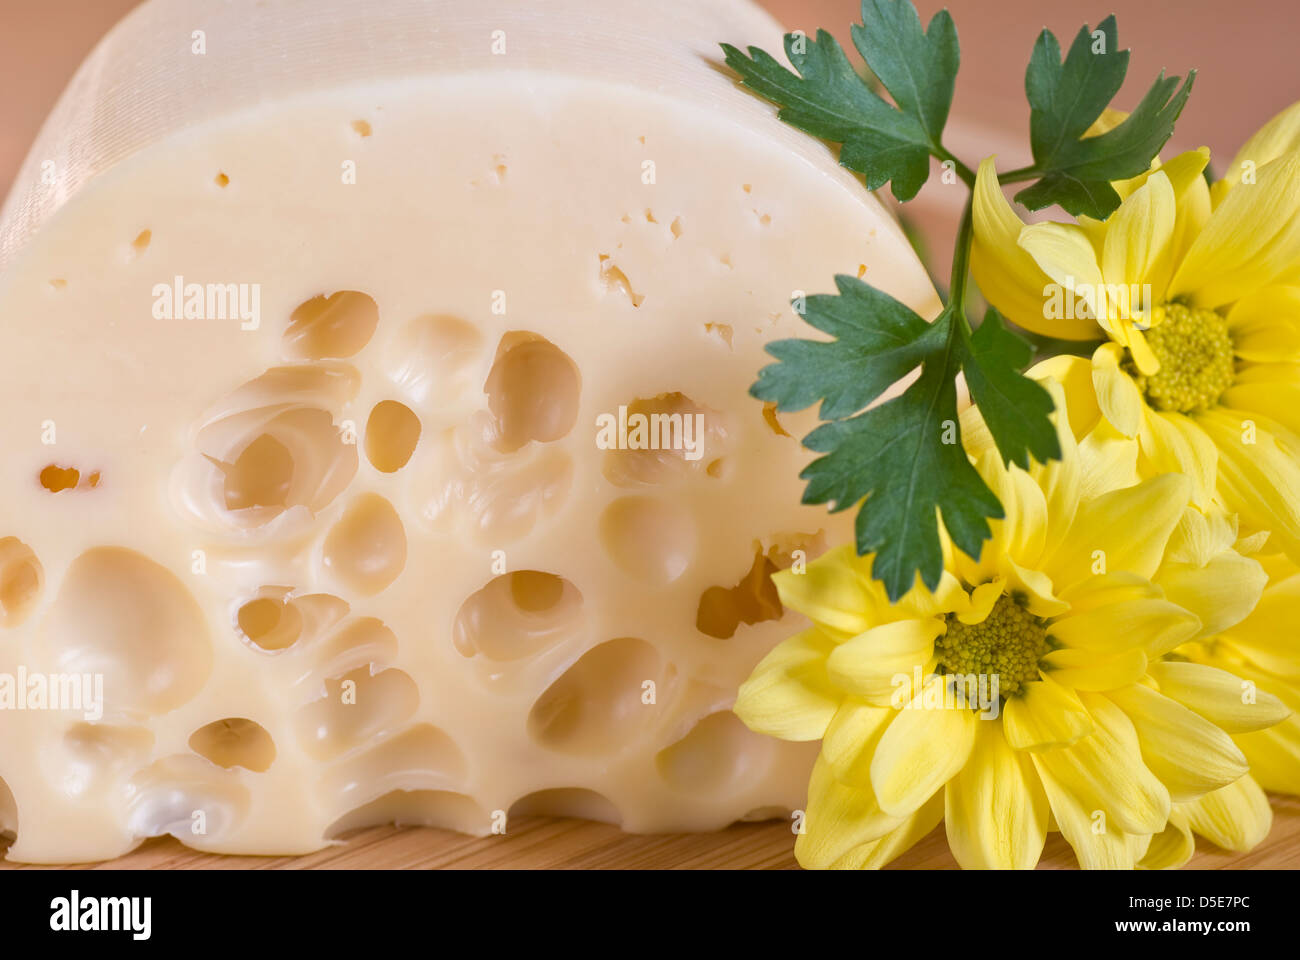 yellow cheese with large holes and flower Stock Photo